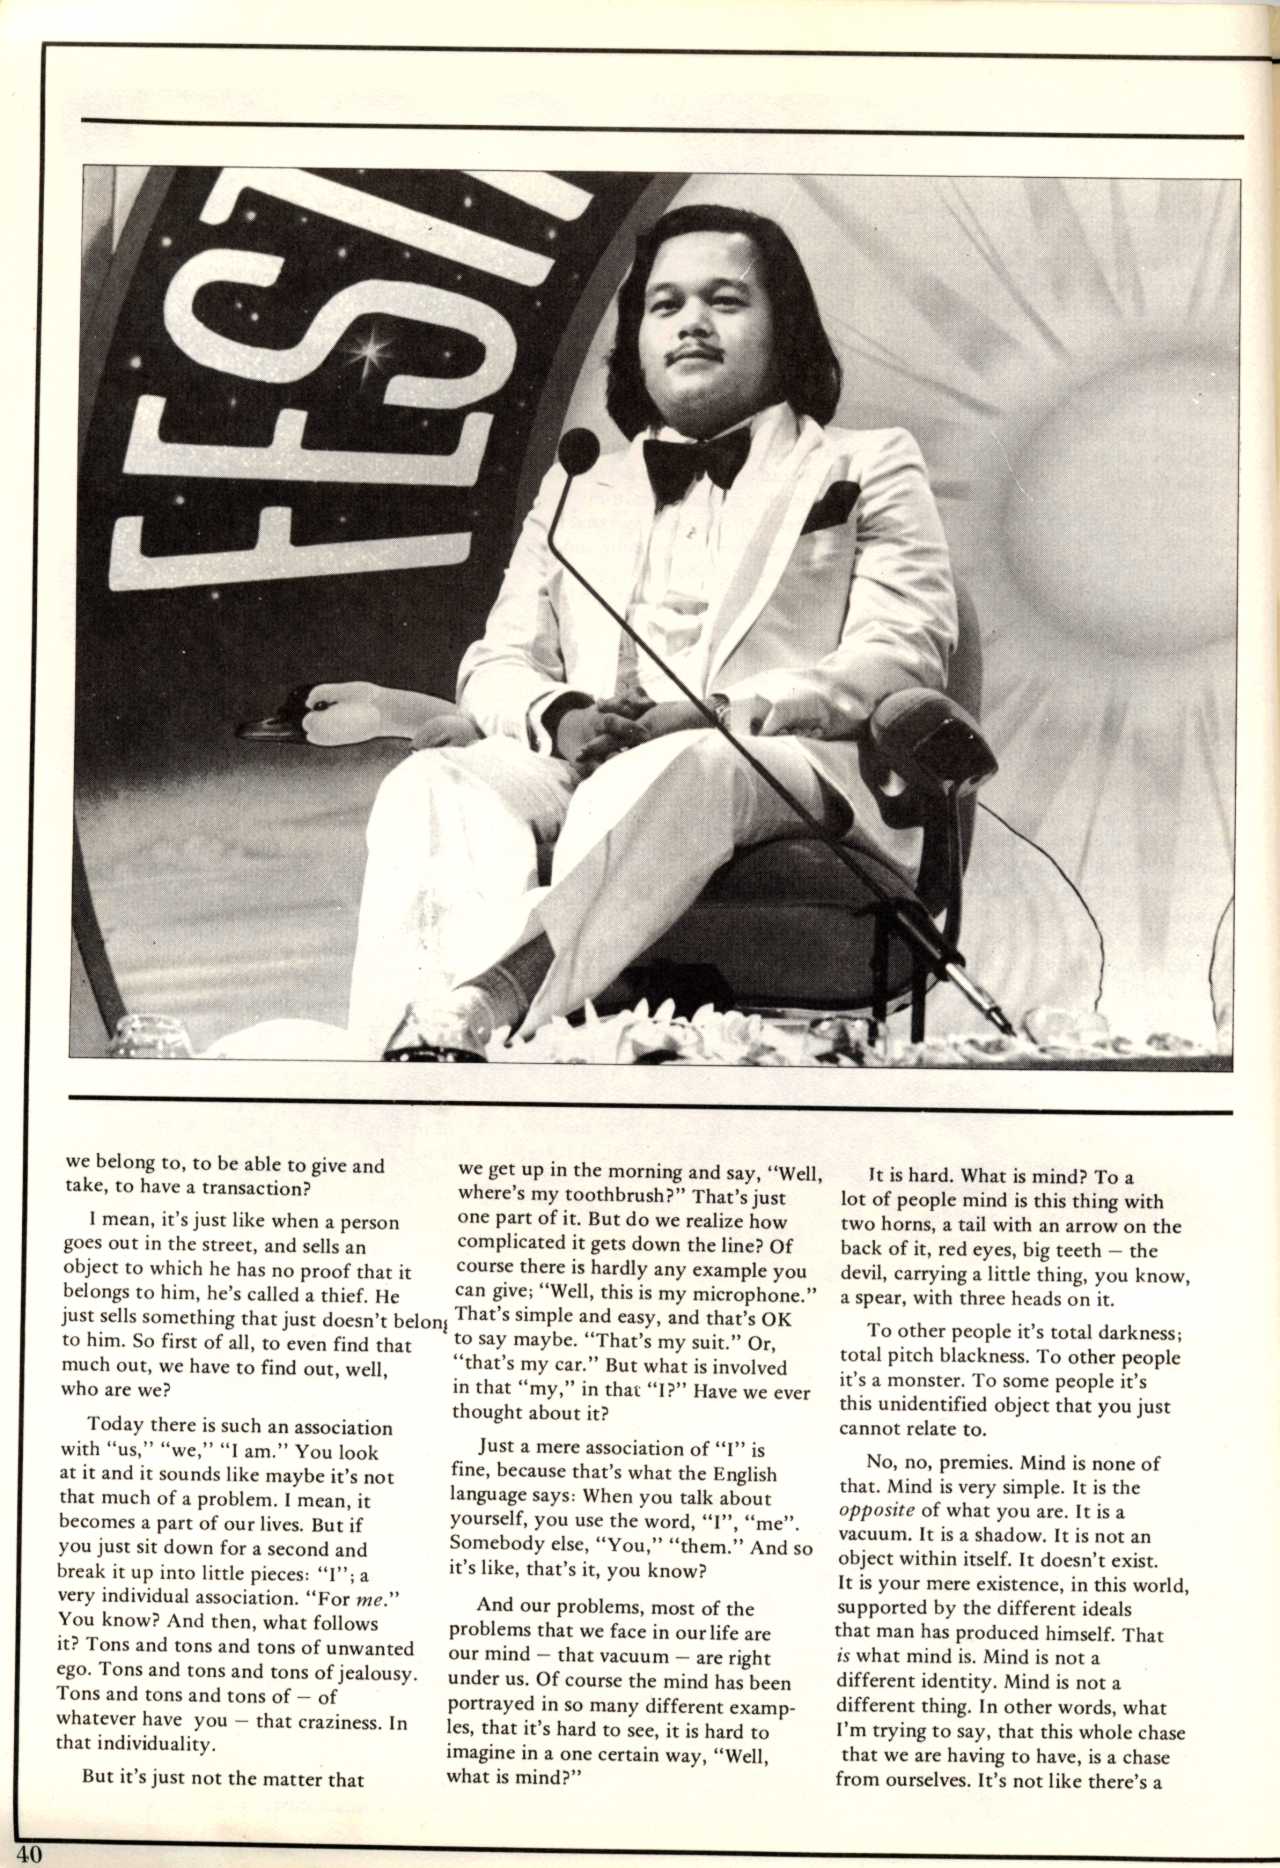 quote_magazine_peace_flight_montreal_may_1_1977_page_40.jpg 238.5K